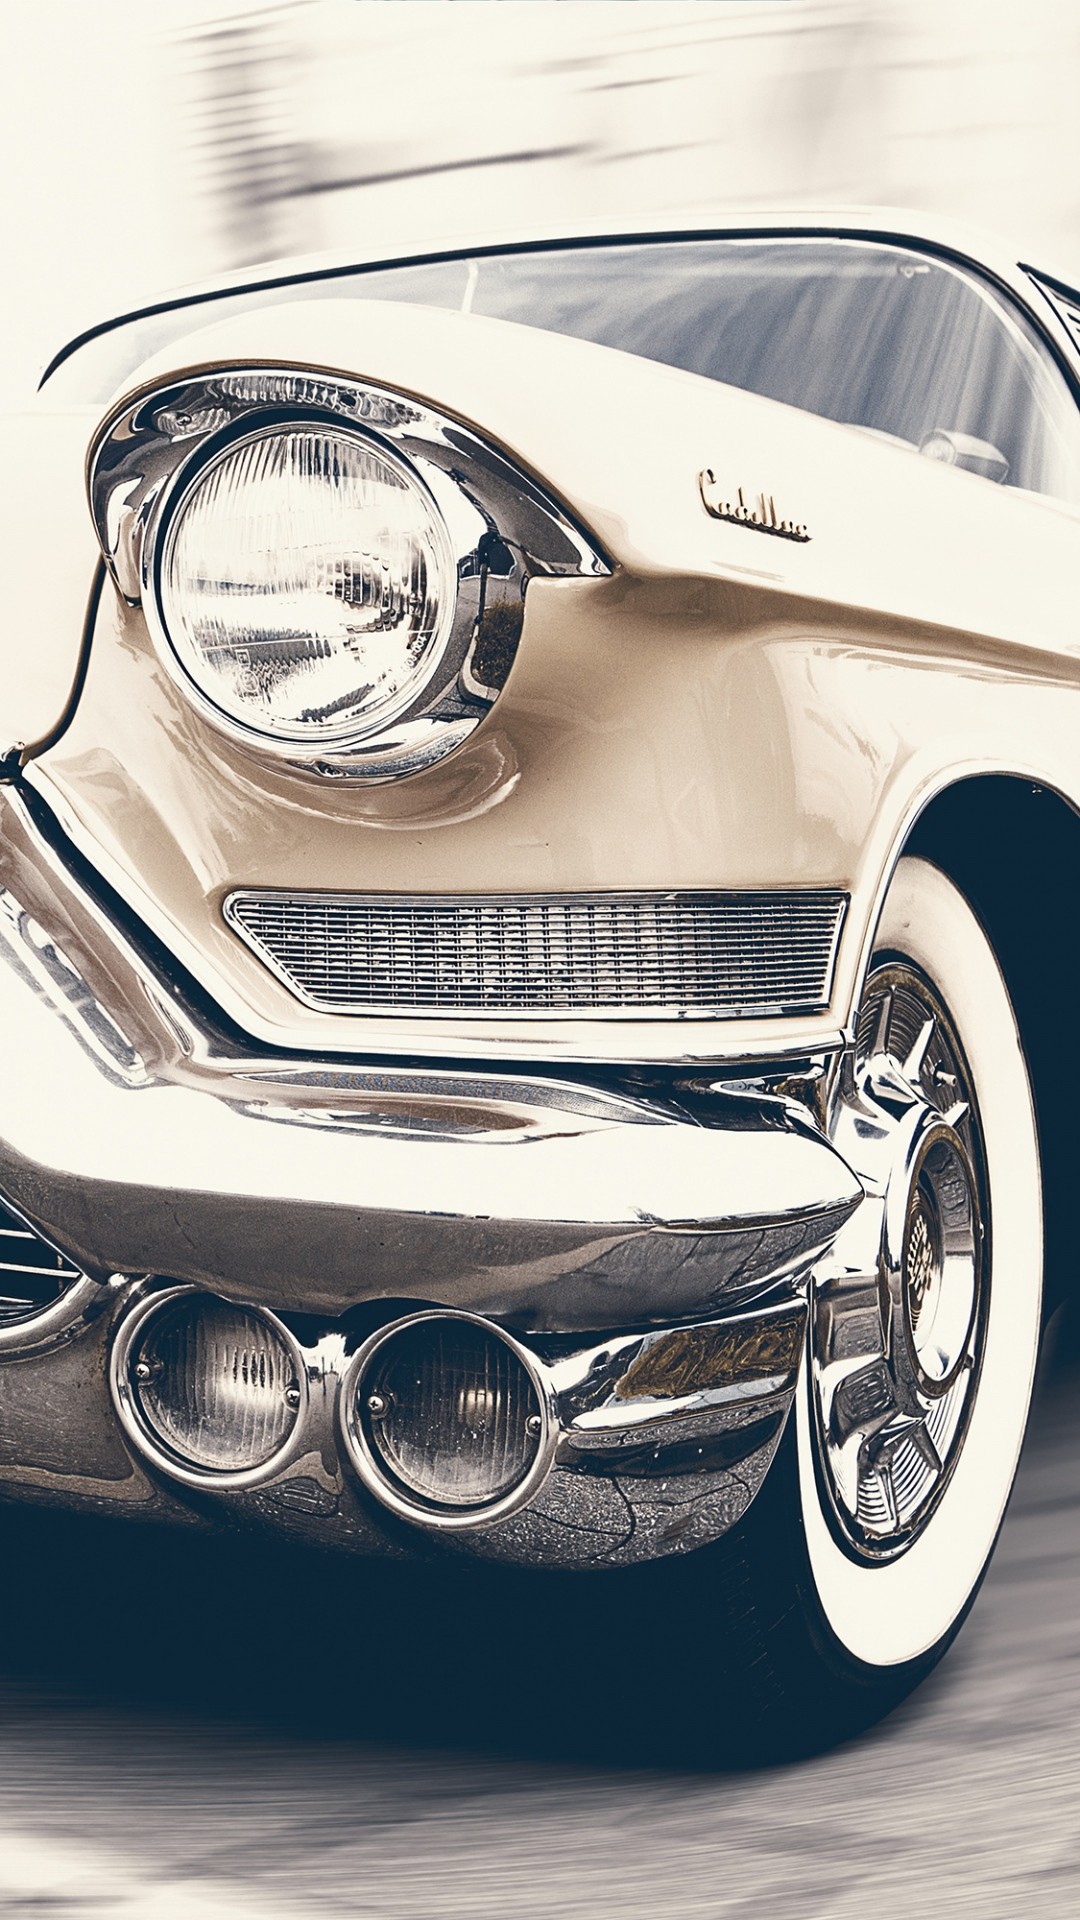 1080x1920  Wallpaper cadillac, oldtimer, front view